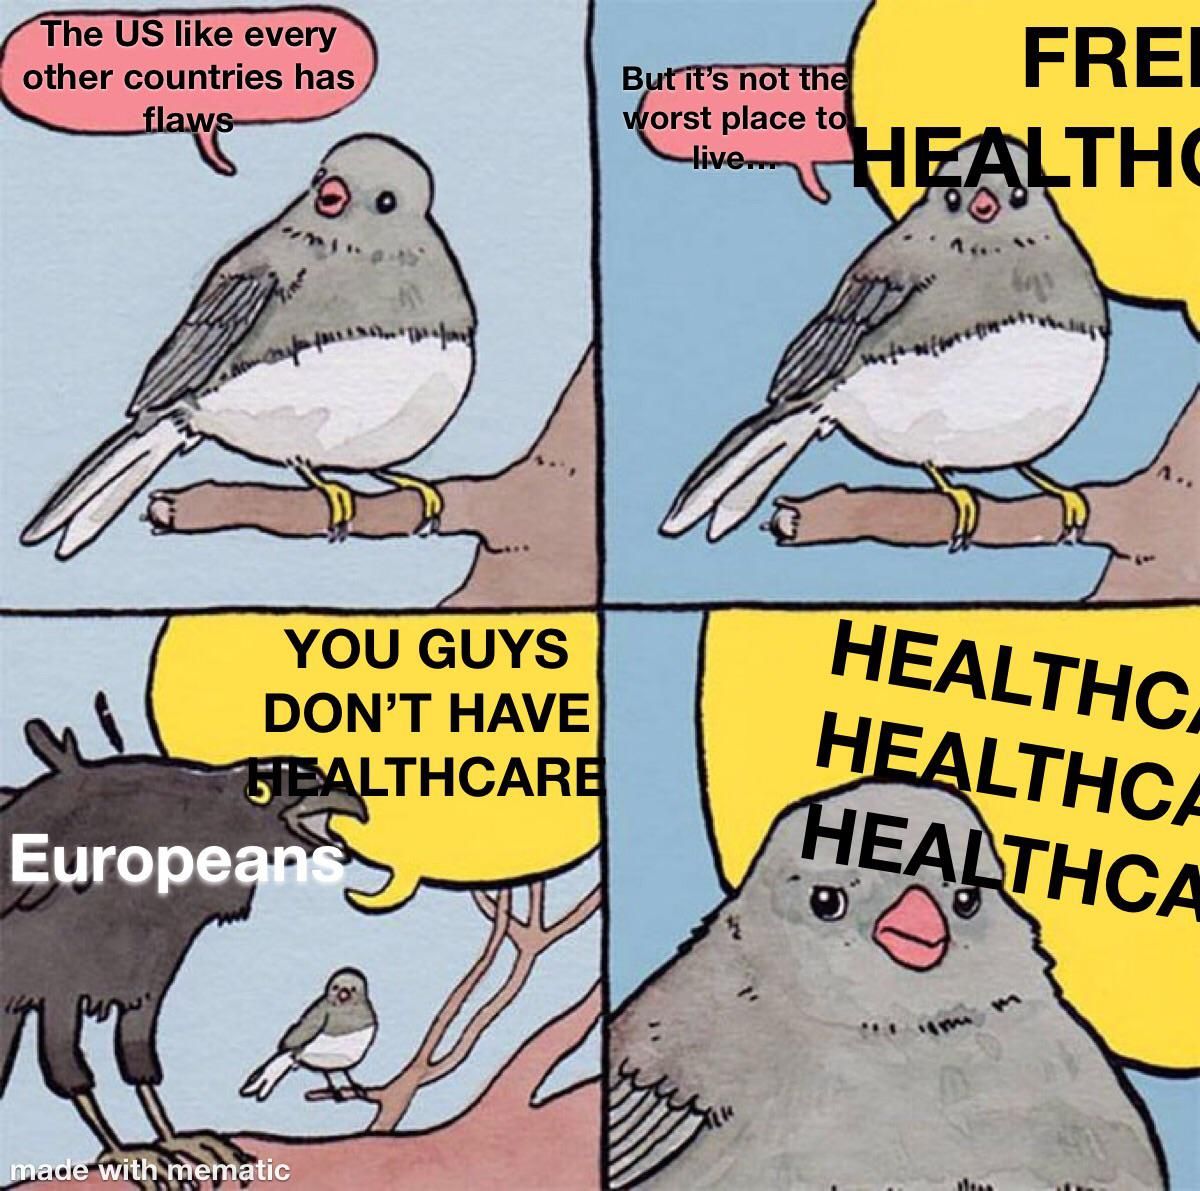 This meme was made in Europe